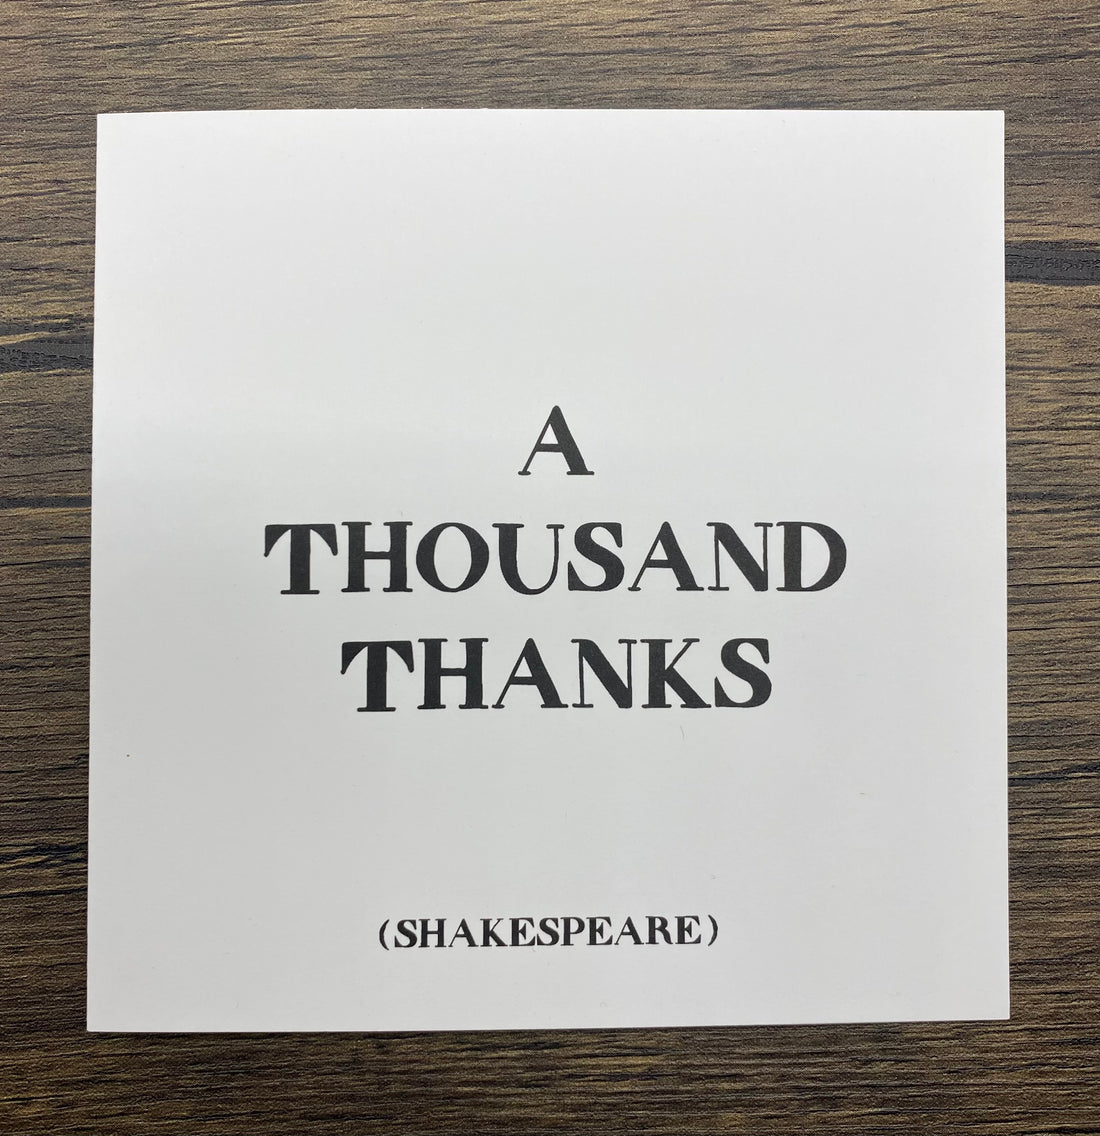 Quotable Card: A thousand thanks